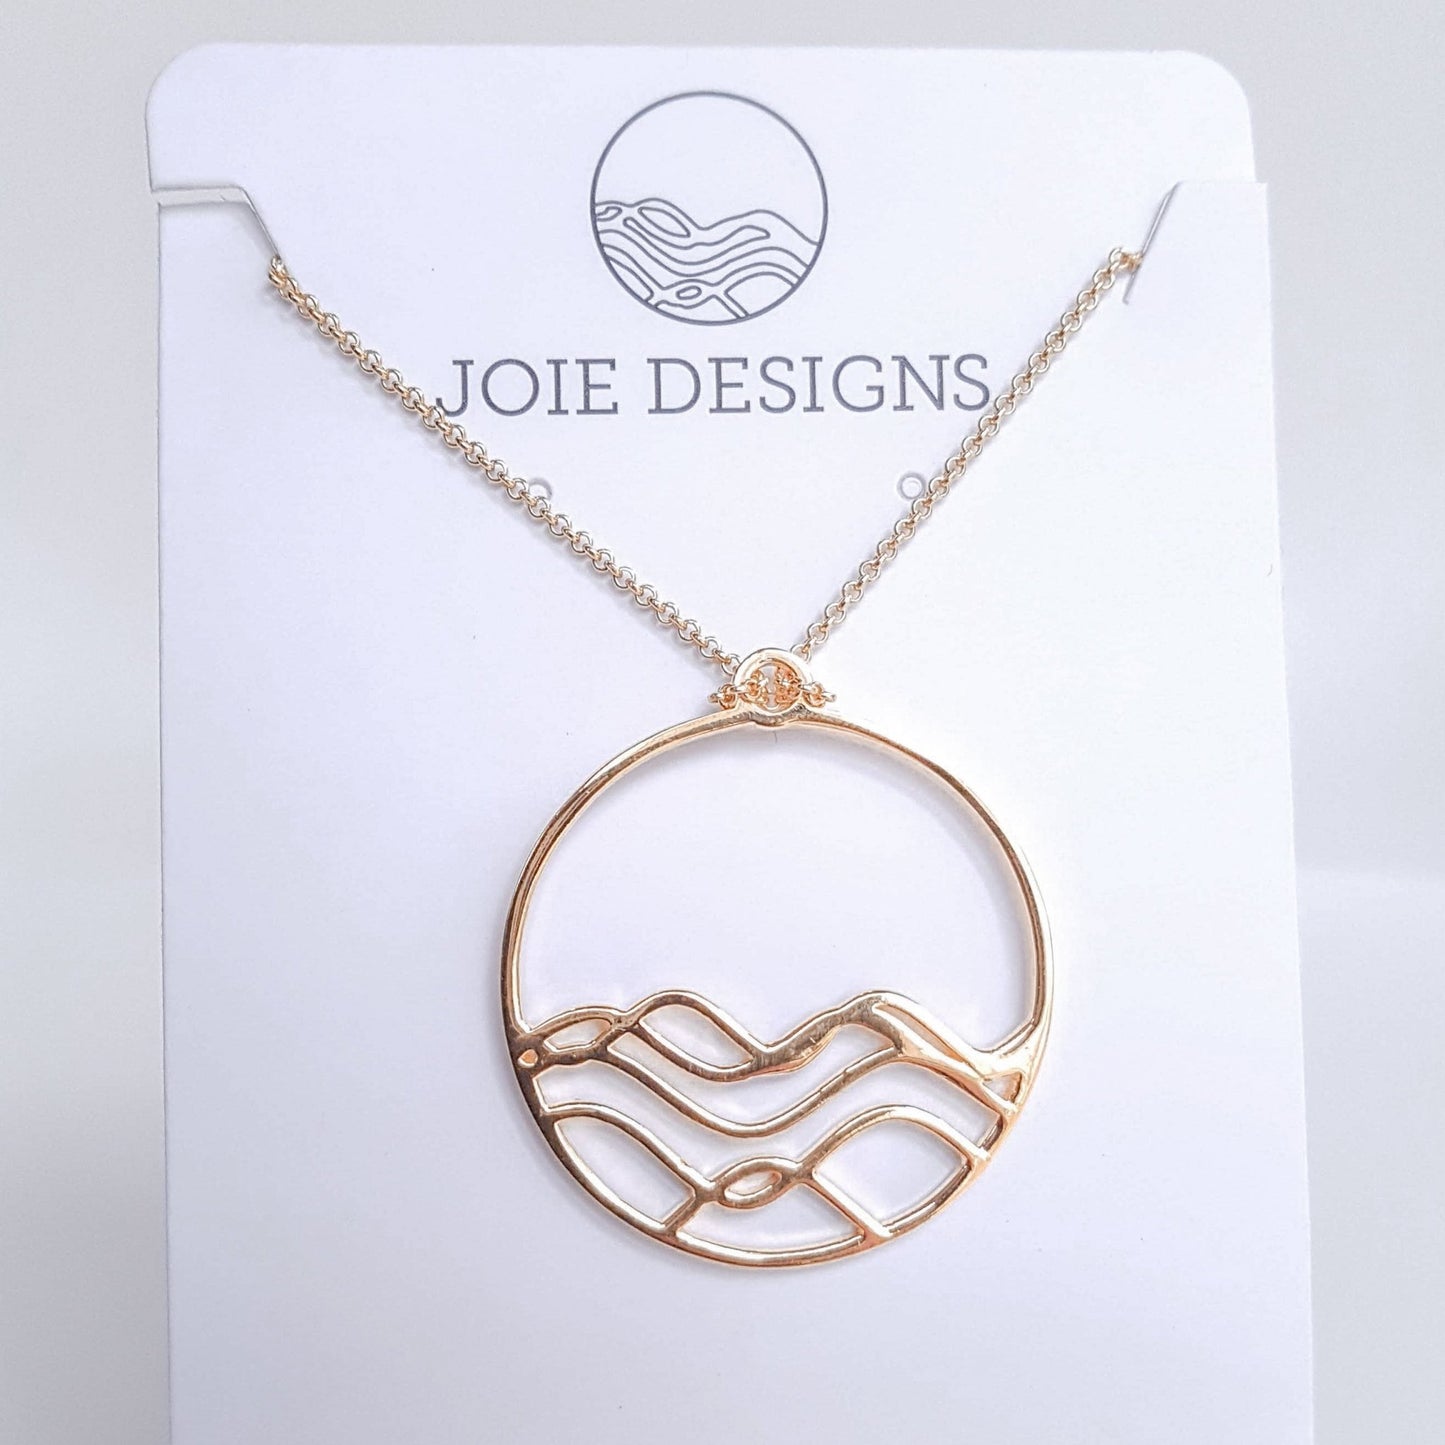 High Tide gold necklace. Circle pendant  filled halfway with wavy lines on a white jewelry card